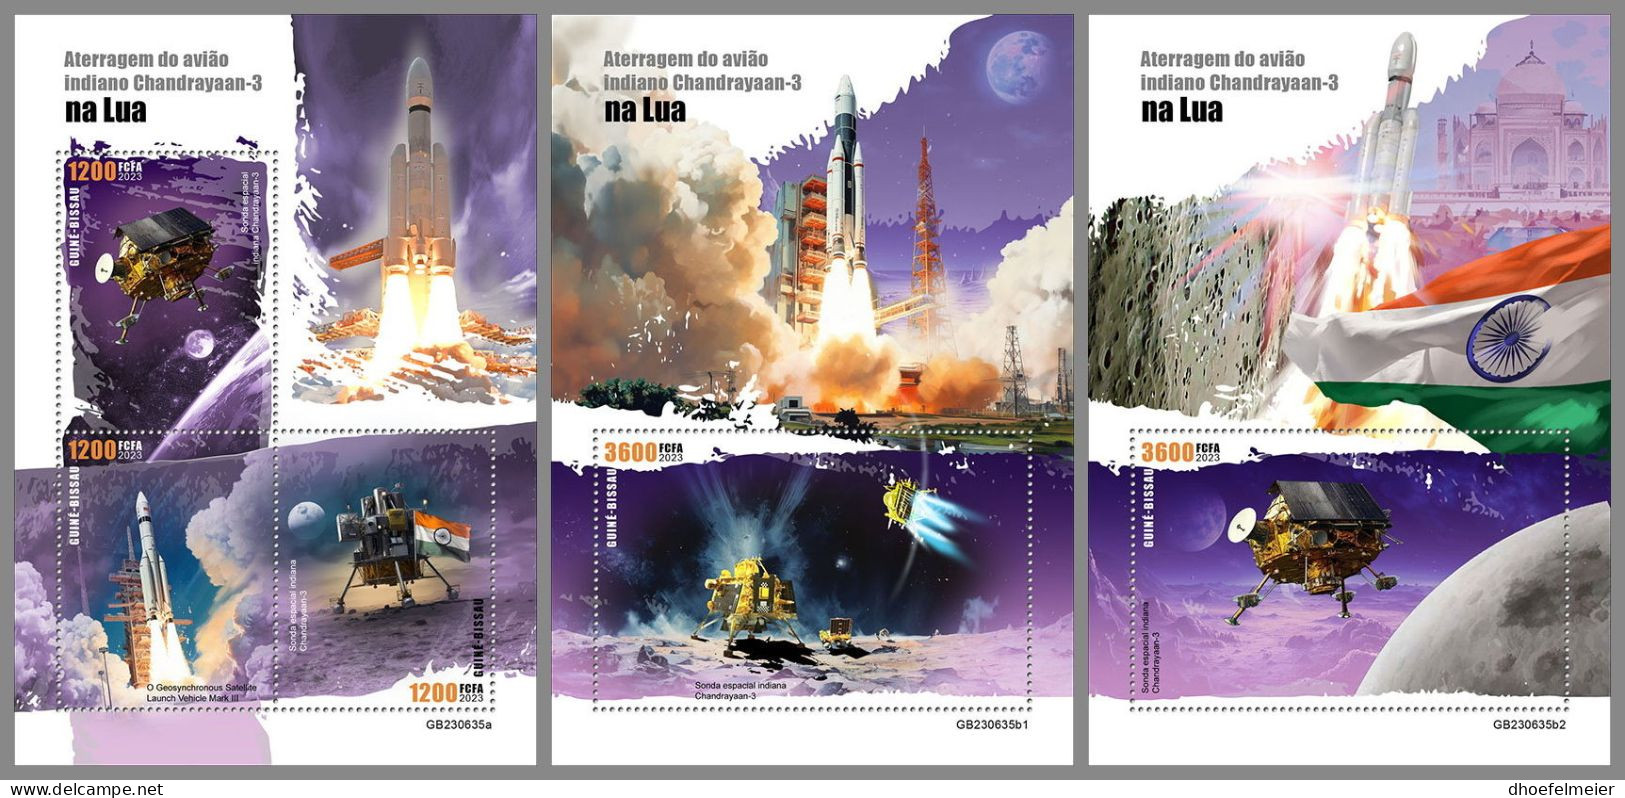 GUINEA-BISSAU 2023 MNH Indian Chandrayaan-3 Space Raumfahrt M/S+2S/S – OFFICIAL ISSUE – DHQ2420 - Africa